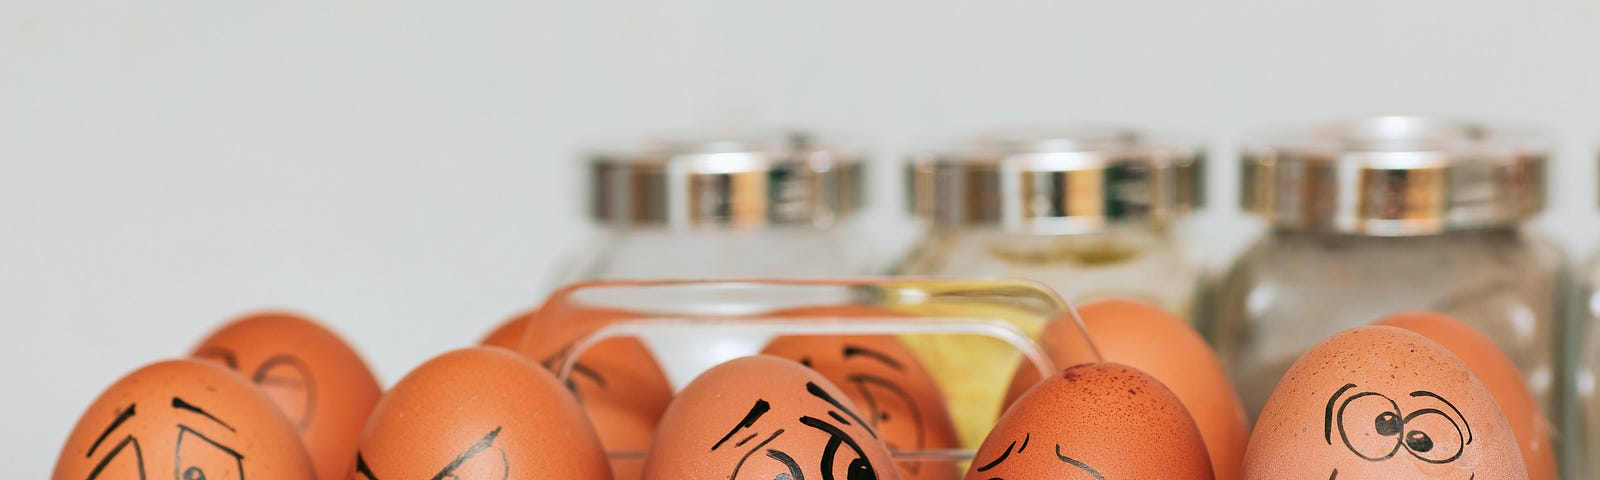 Brown eggs with crazy faces on them